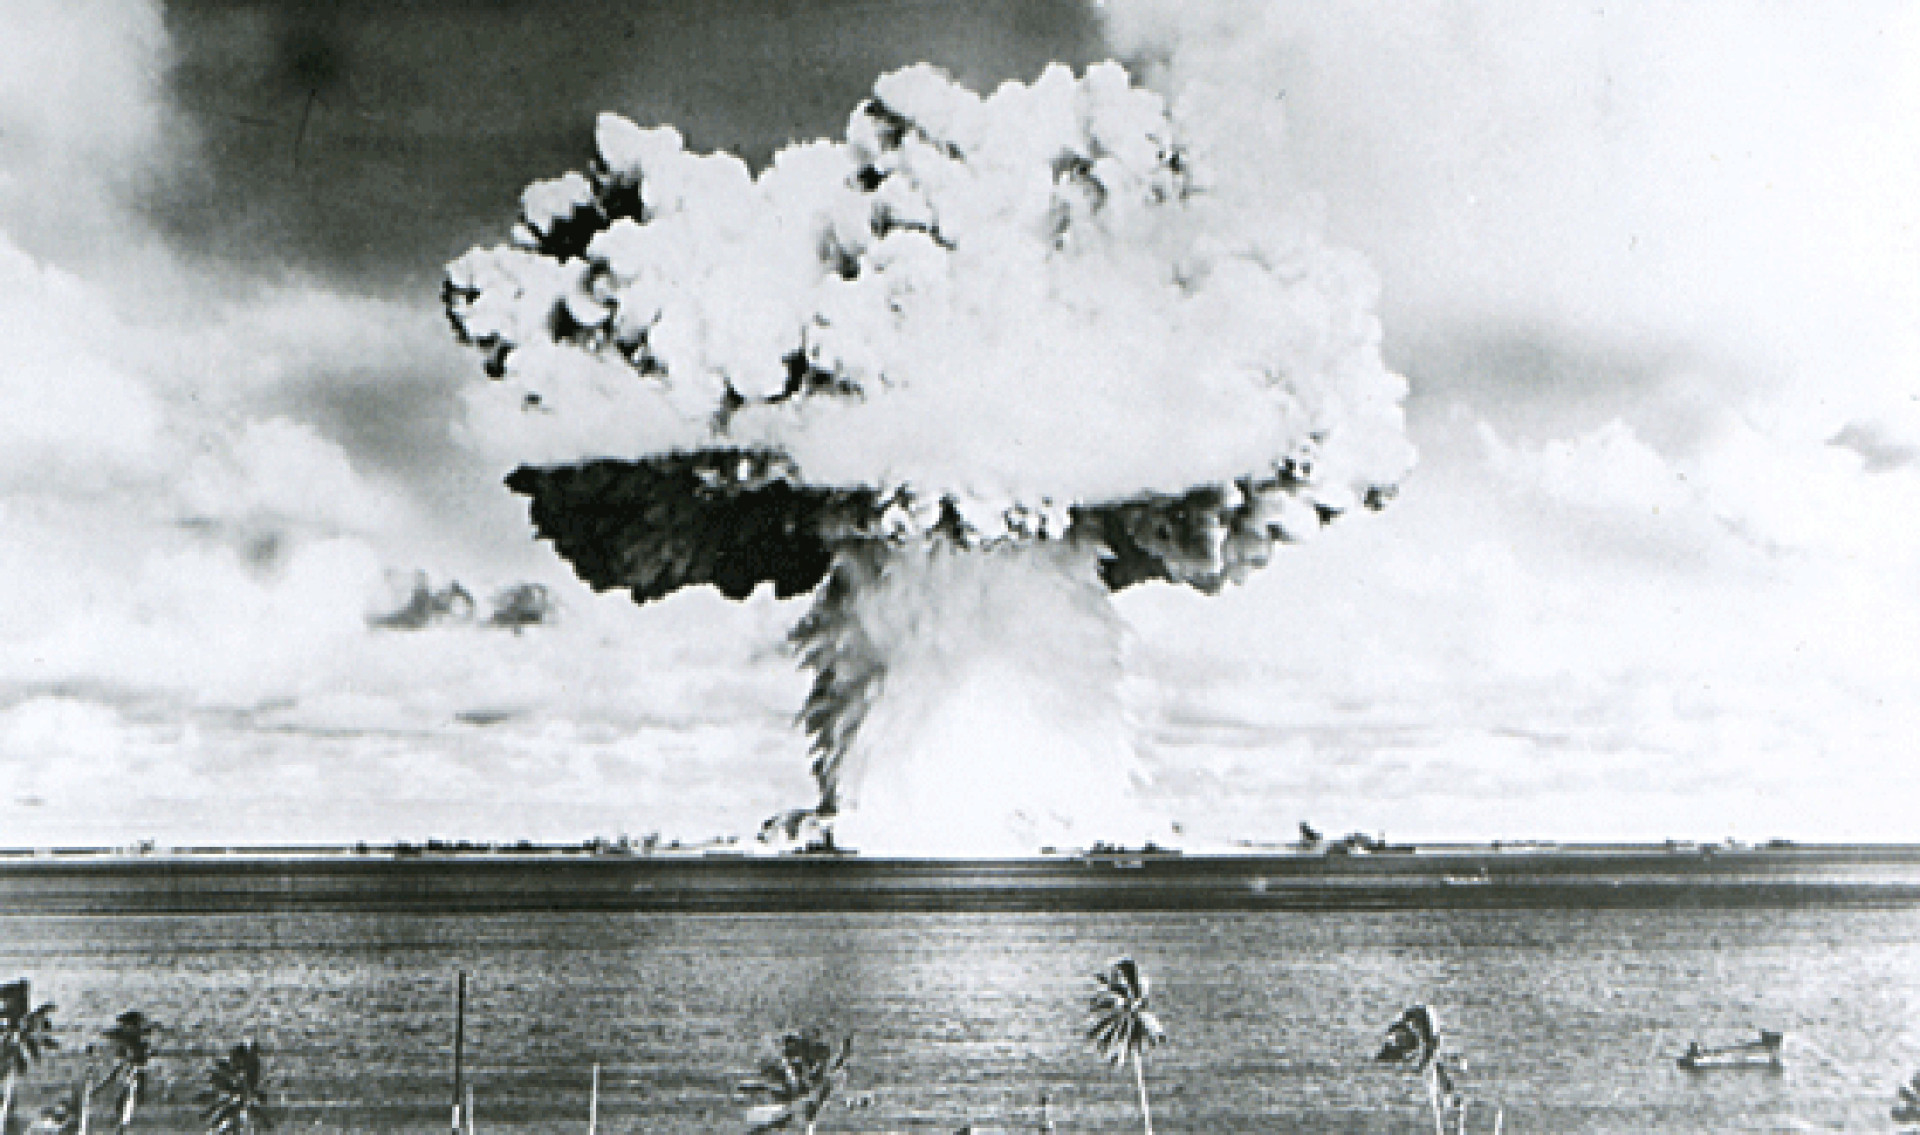 The site of 23 nuclear tests between 1946 and 1958, Bikini Atoll opened to the public in 1996, after being deemed clear of radiation.<p><a href="https://www.msn.com/en-sg/community/channel/vid-7xx8mnucu55yw63we9va2gwr7uihbxwc68fxqp25x6tg4ftibpra?cvid=94631541bc0f4f89bfd59158d696ad7e">Follow us and access great exclusive content every day</a></p>